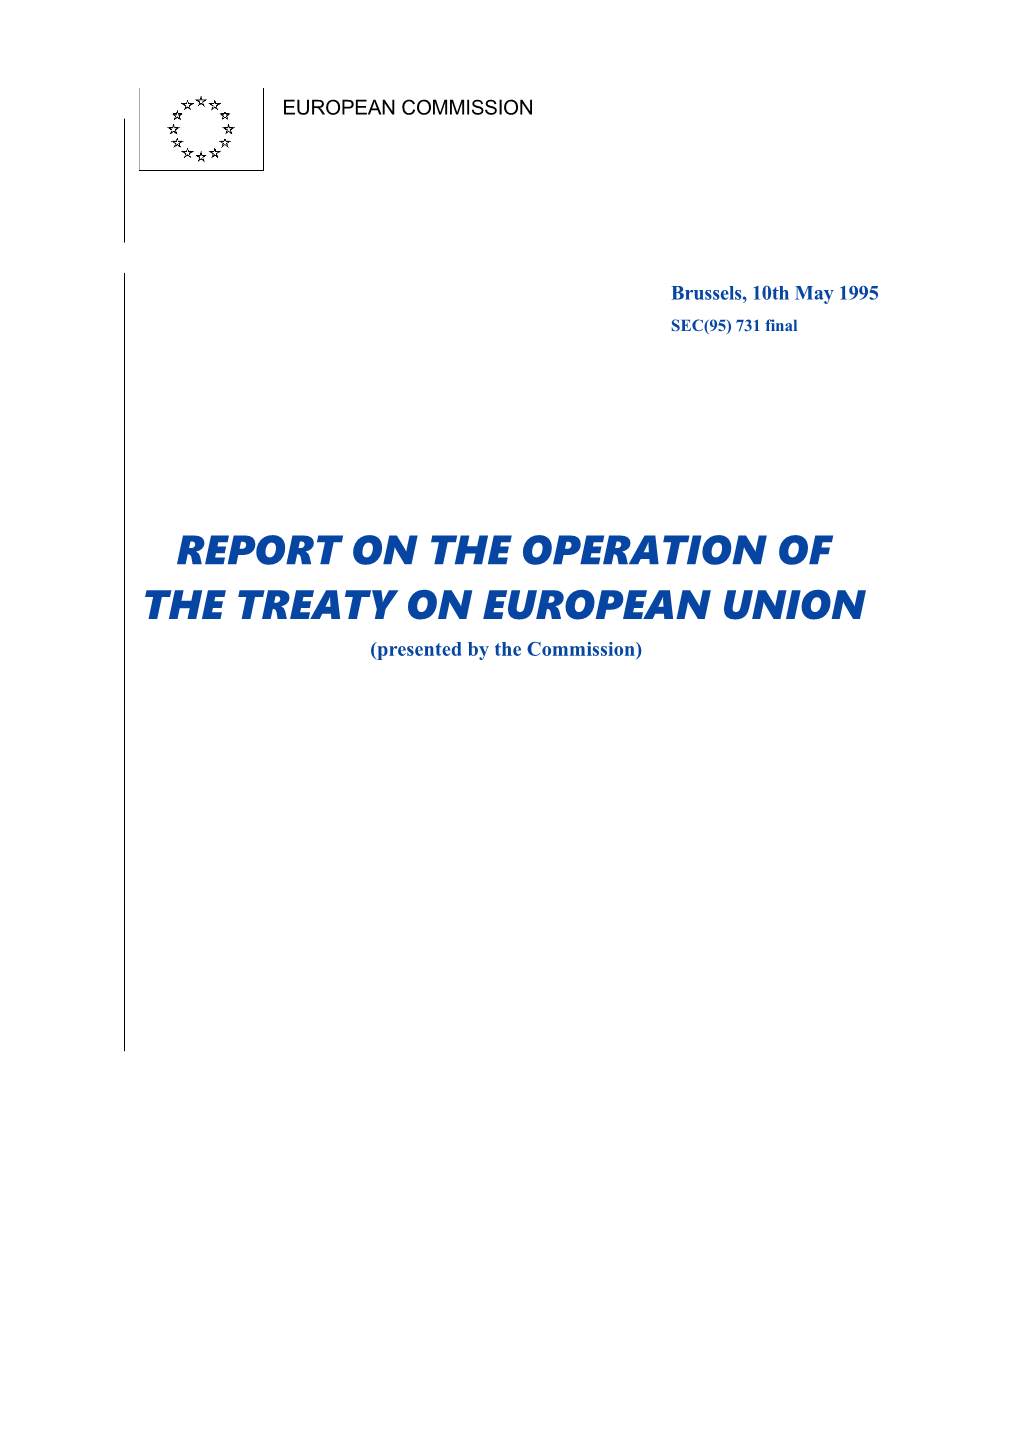 Report on the Operation of the Treaty on European Union